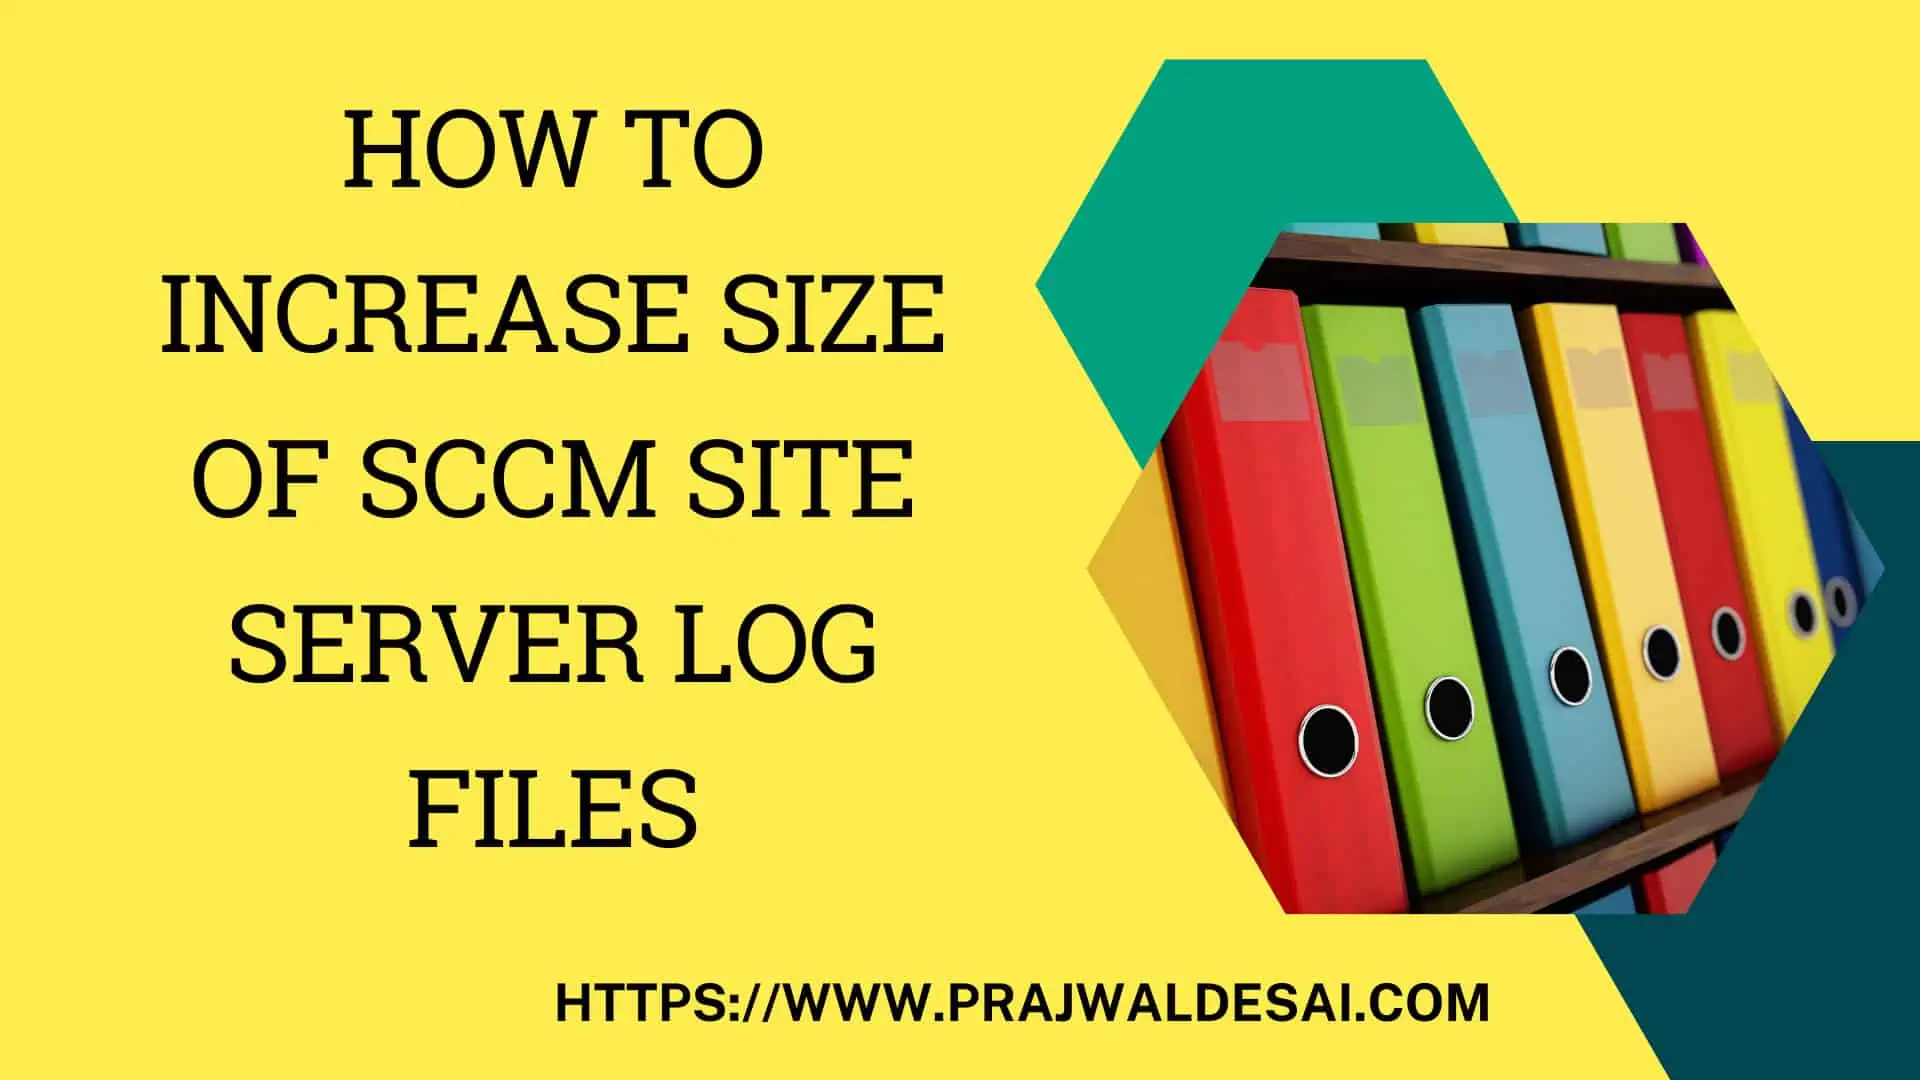 How to Increase the Size of SCCM Site Server Log Files